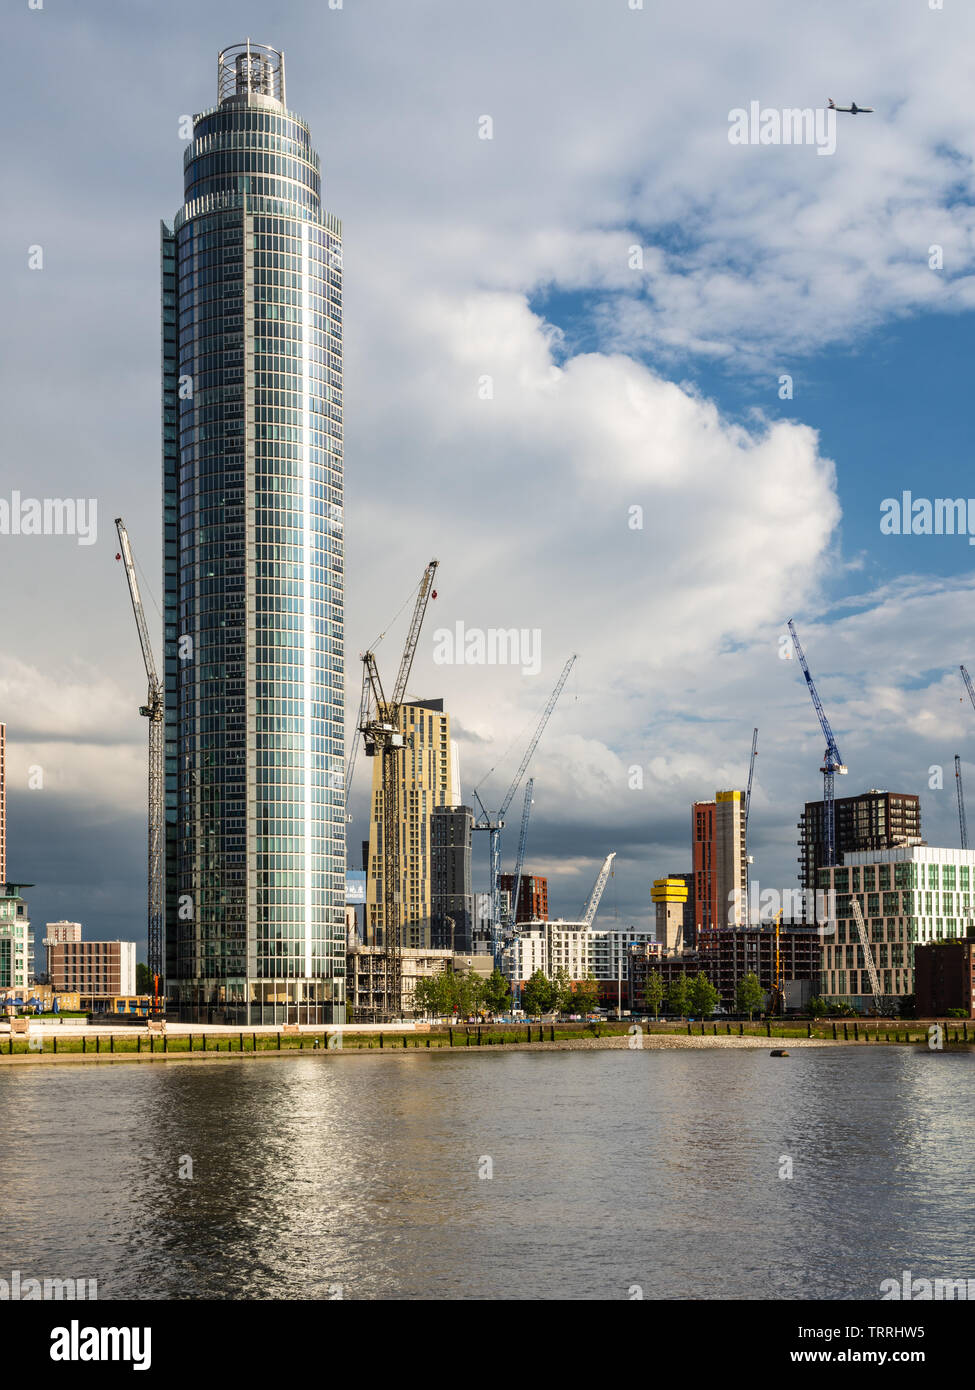 London, England, UK - May 28, 2019: The St George's Wharf skyscraper and other new build apartment buildings stand among construction cranes in the Ni Stock Photo